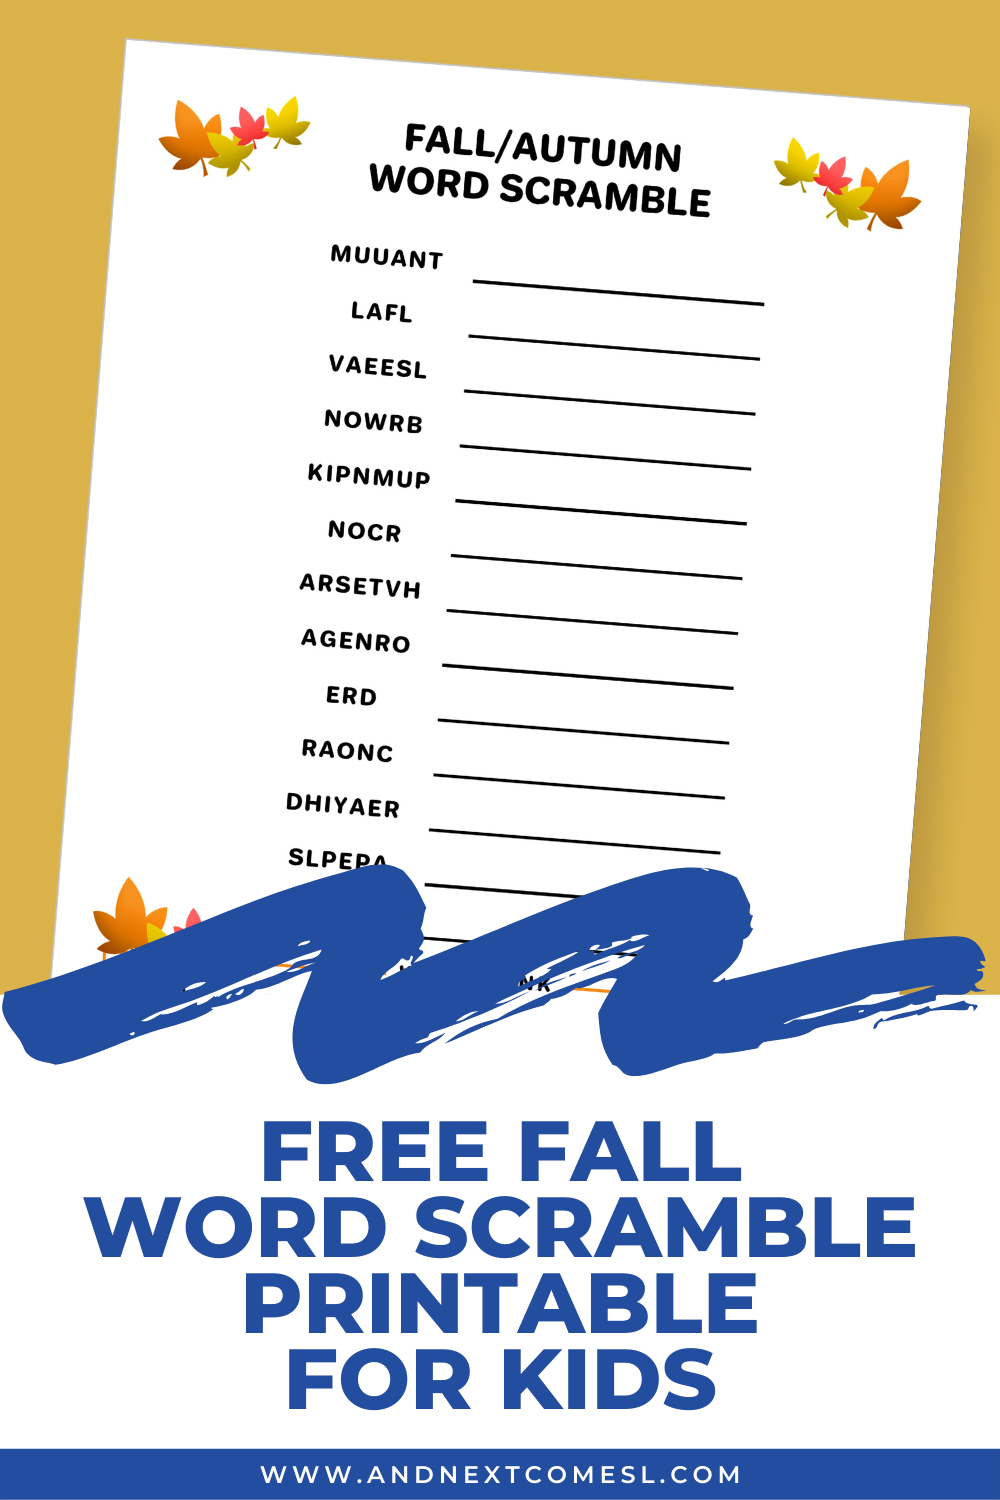 free-fall-word-scramble-printable-for-kids-and-next-comes-l-hyperlexia-resources